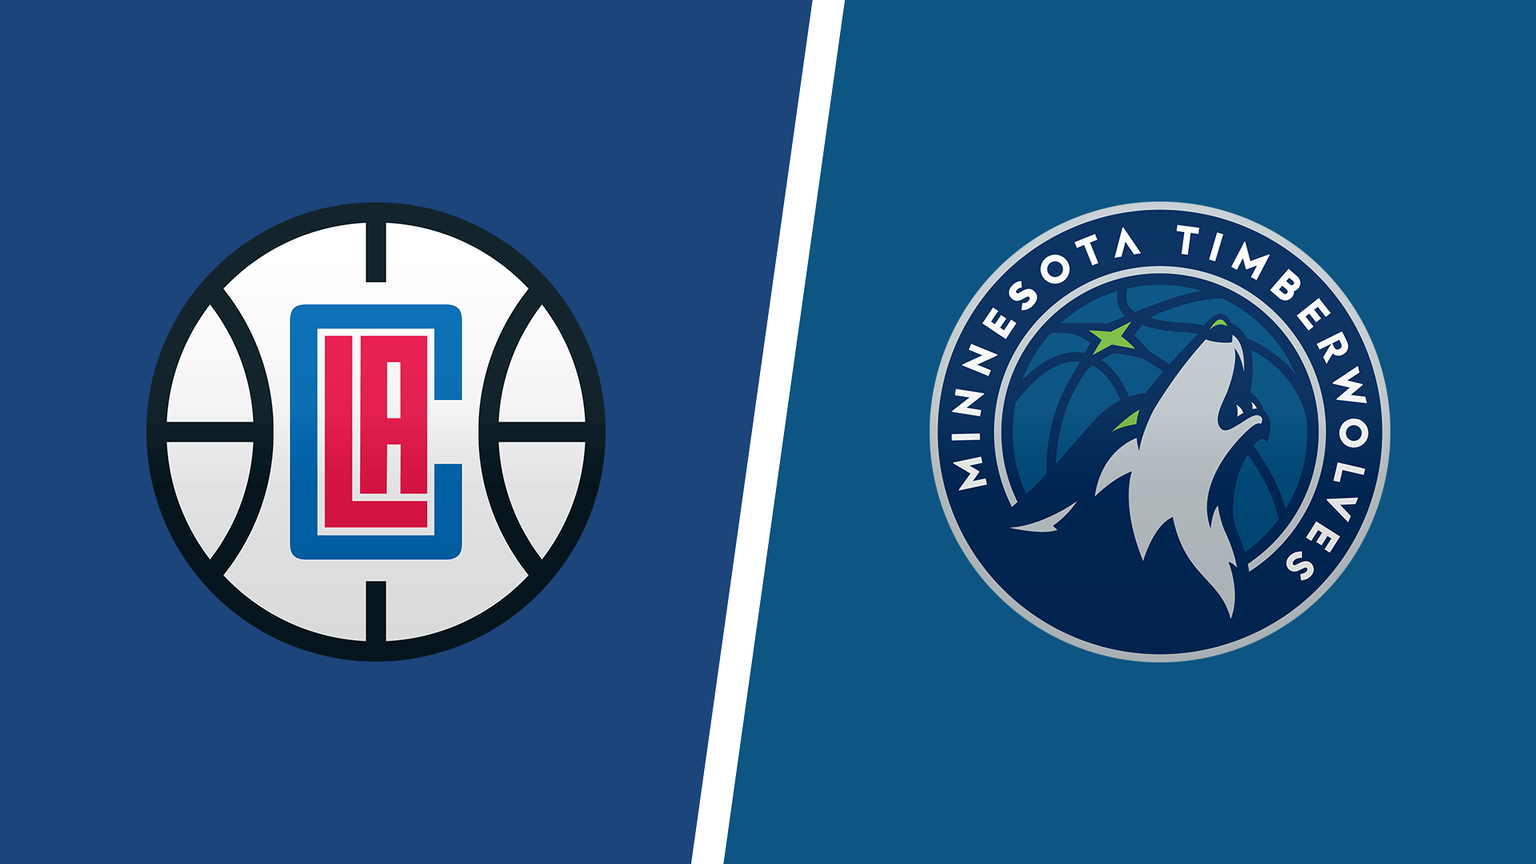 How to Watch Minnesota Timberwolves vs. LA Clippers Game Live Online on